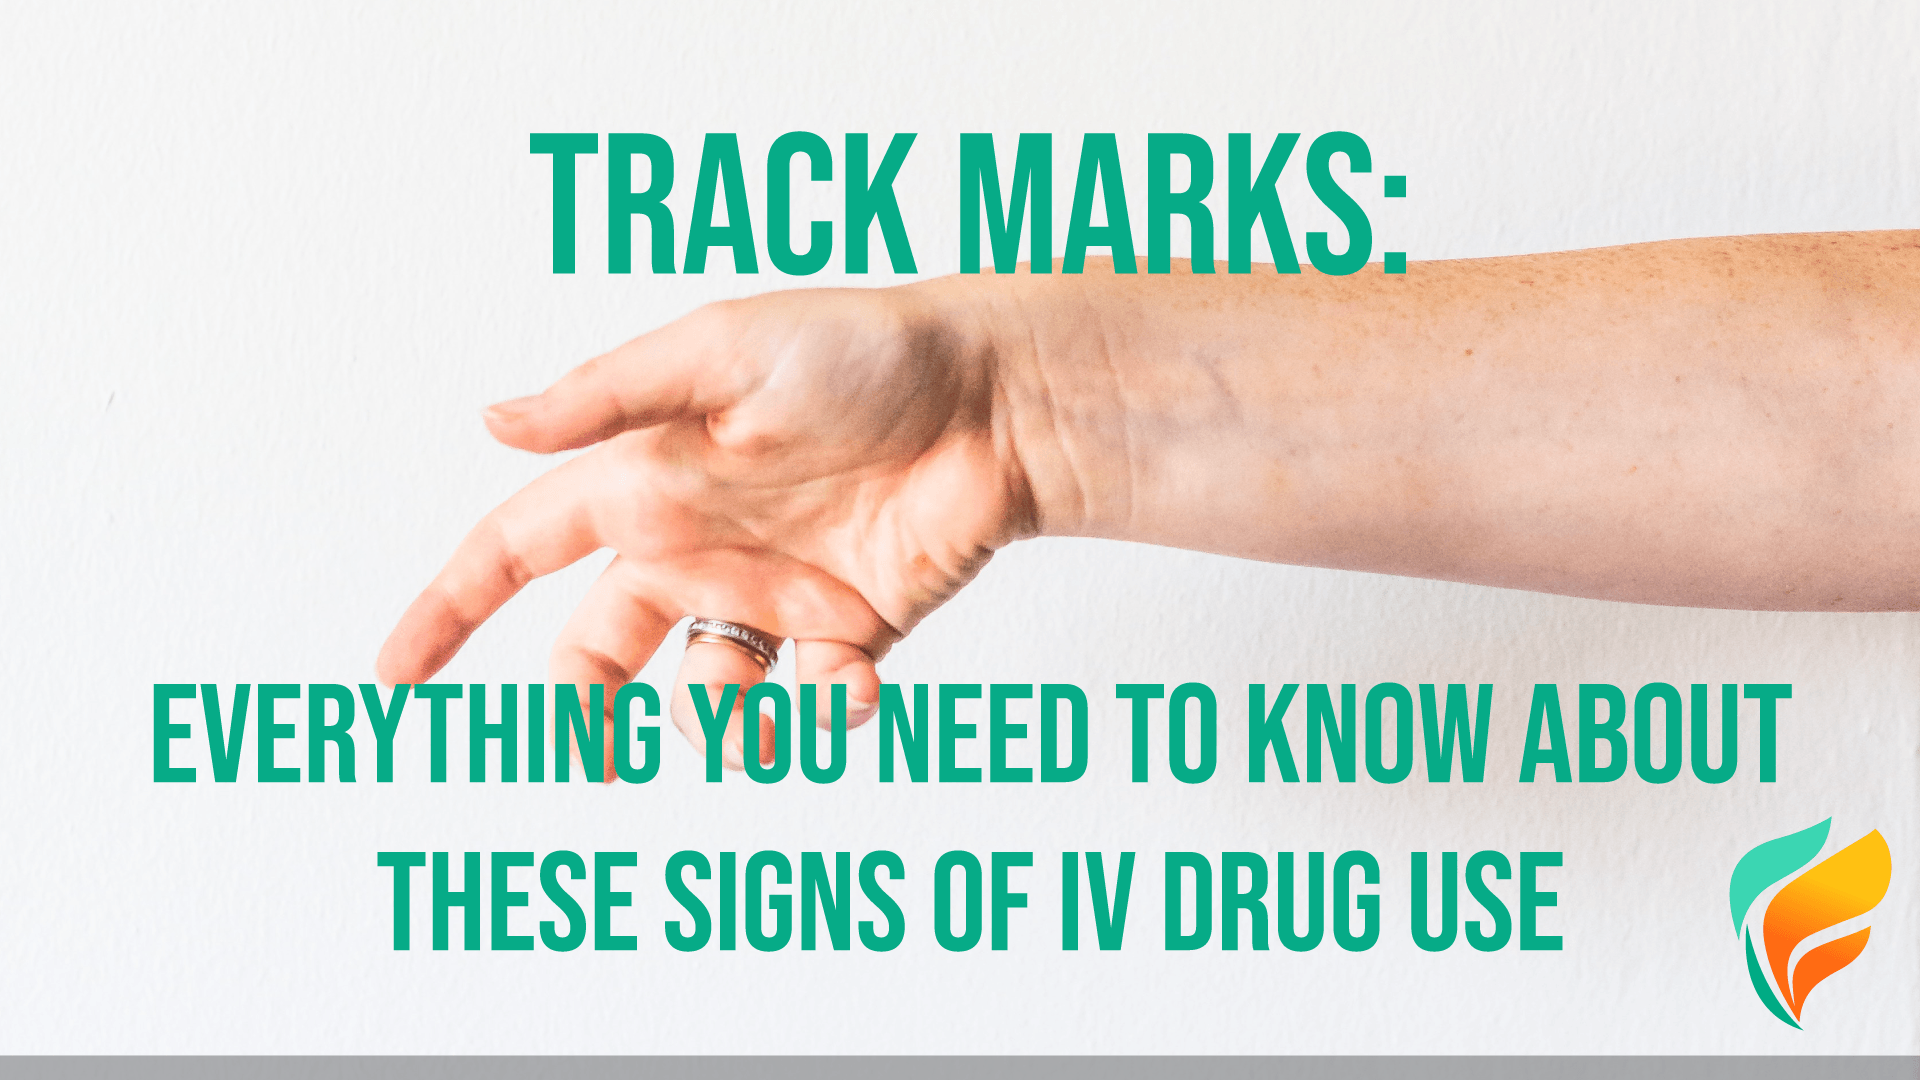 Track Marks: Everything You Need to Know About These Signs of IV Drug Use